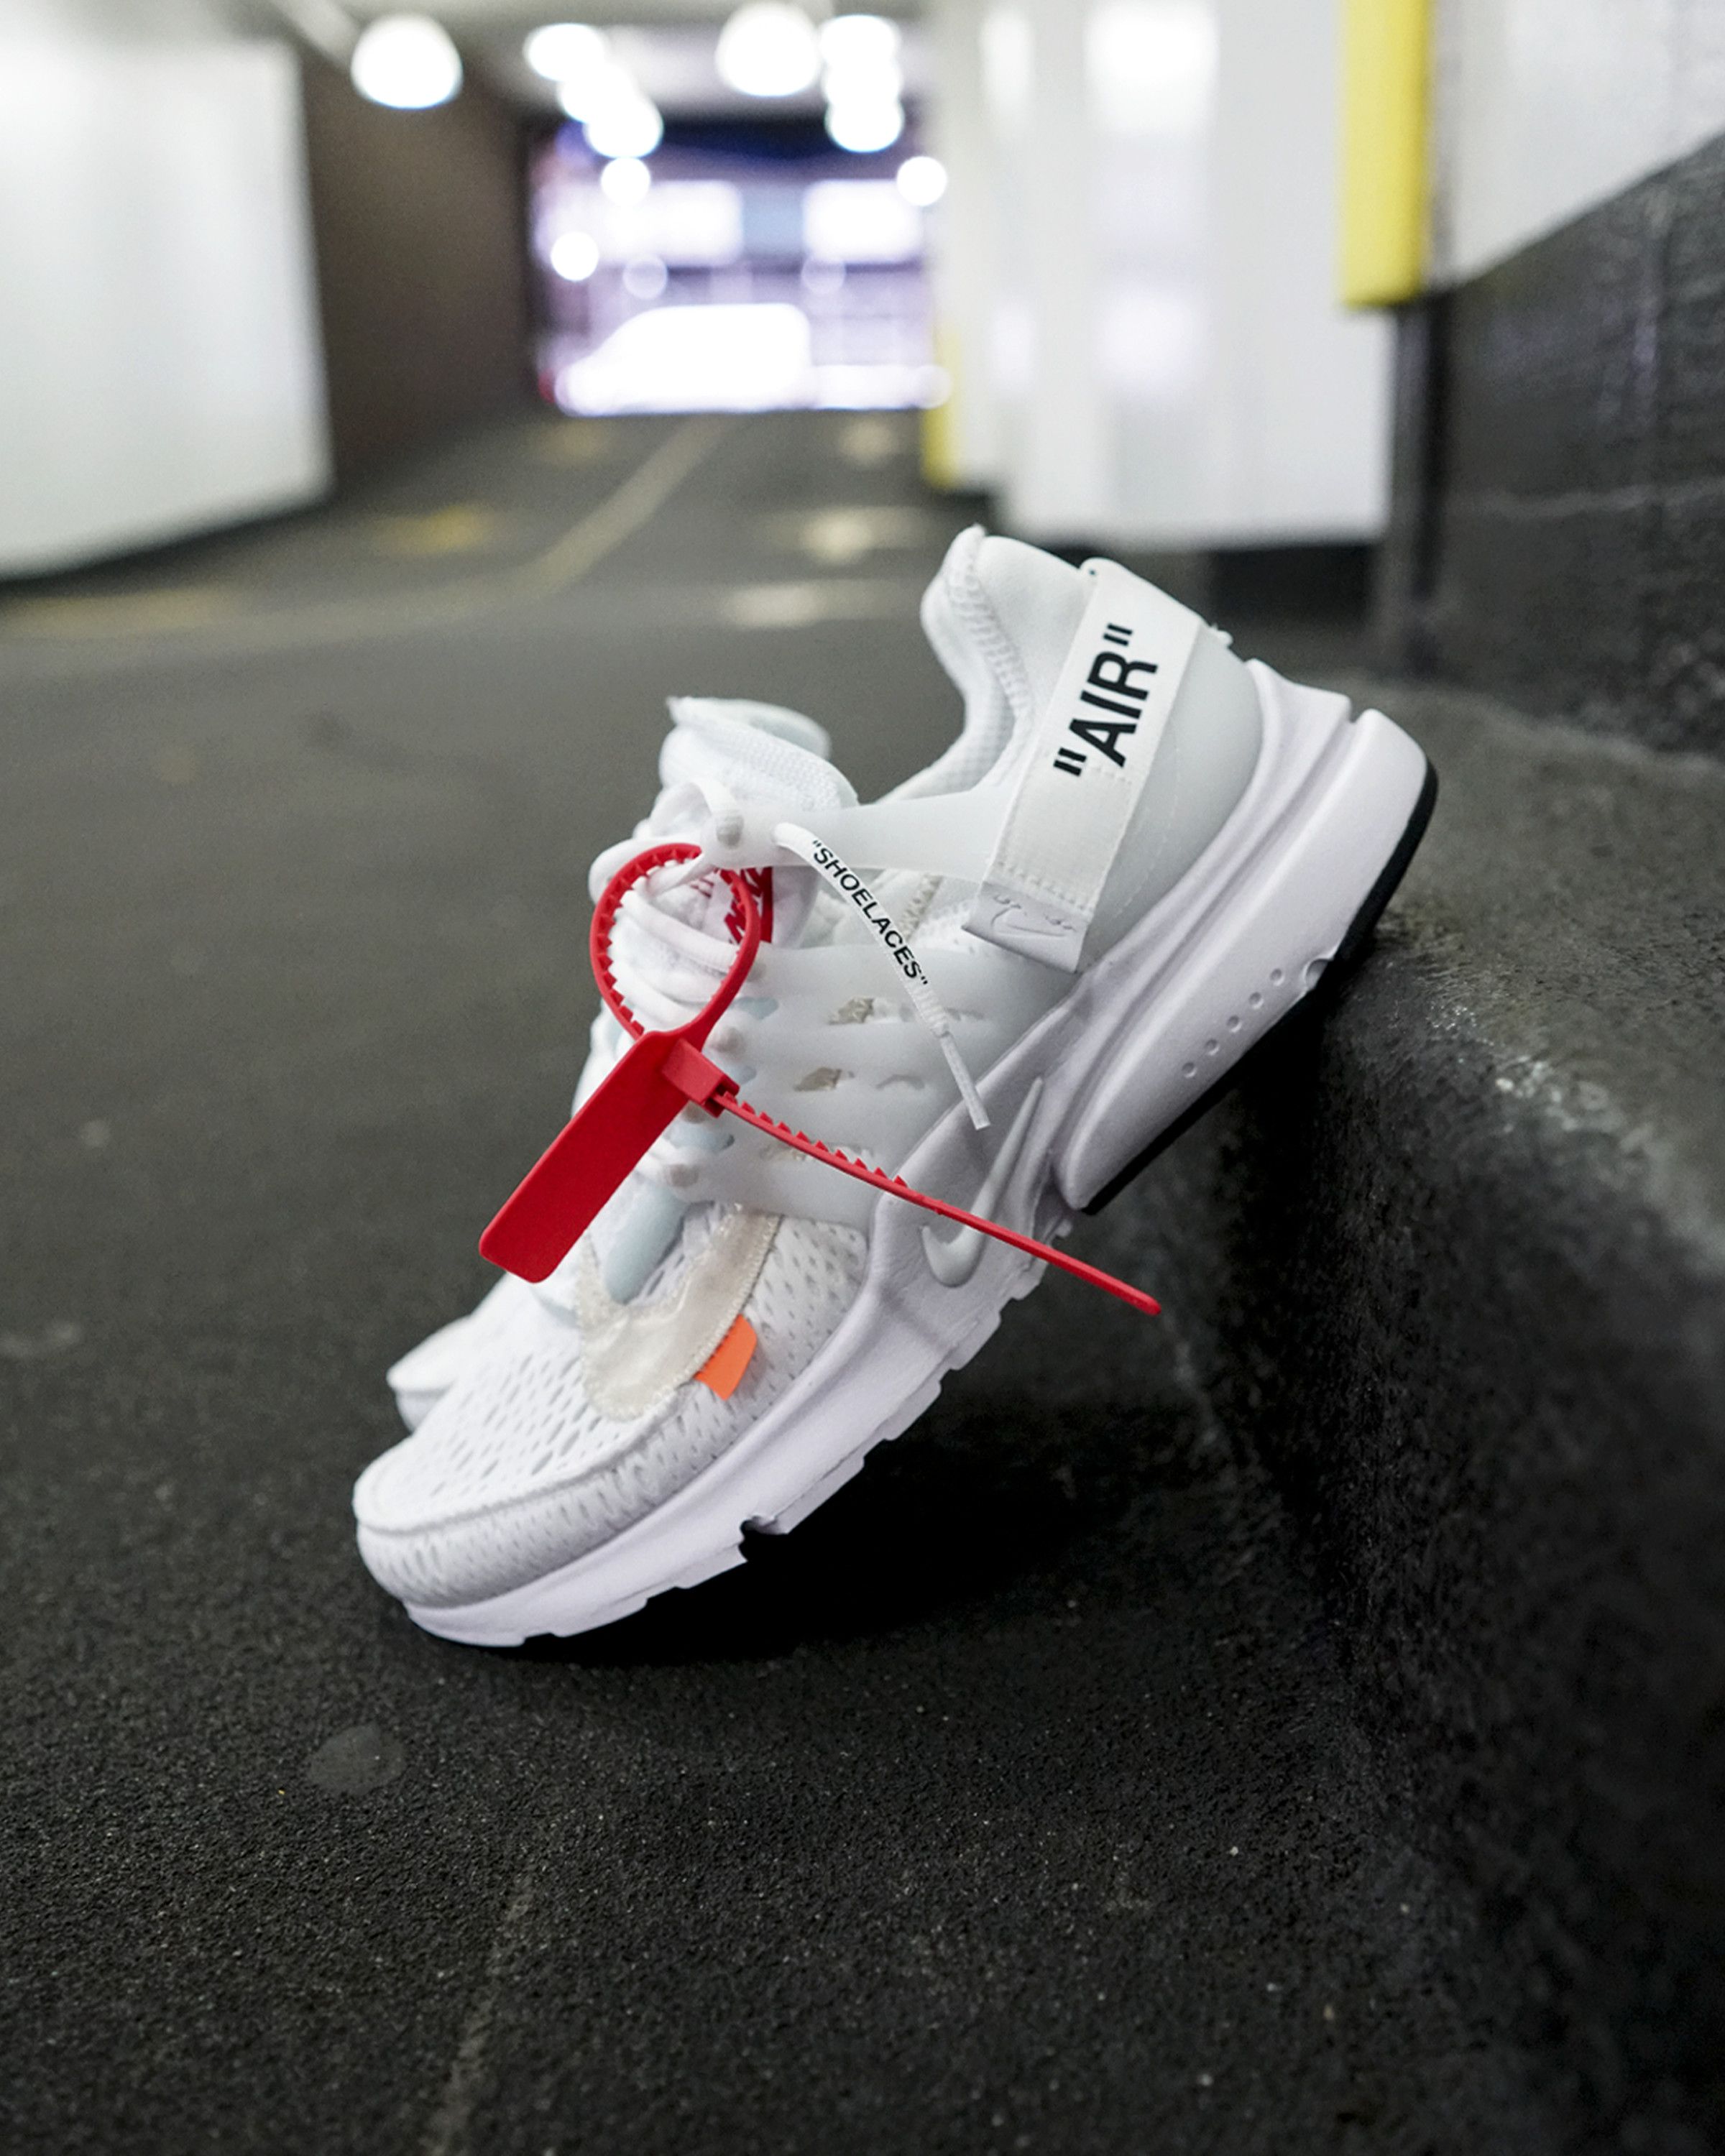 Here's Your Last Chance to Get the Newest Off-White x Nike Air Presto